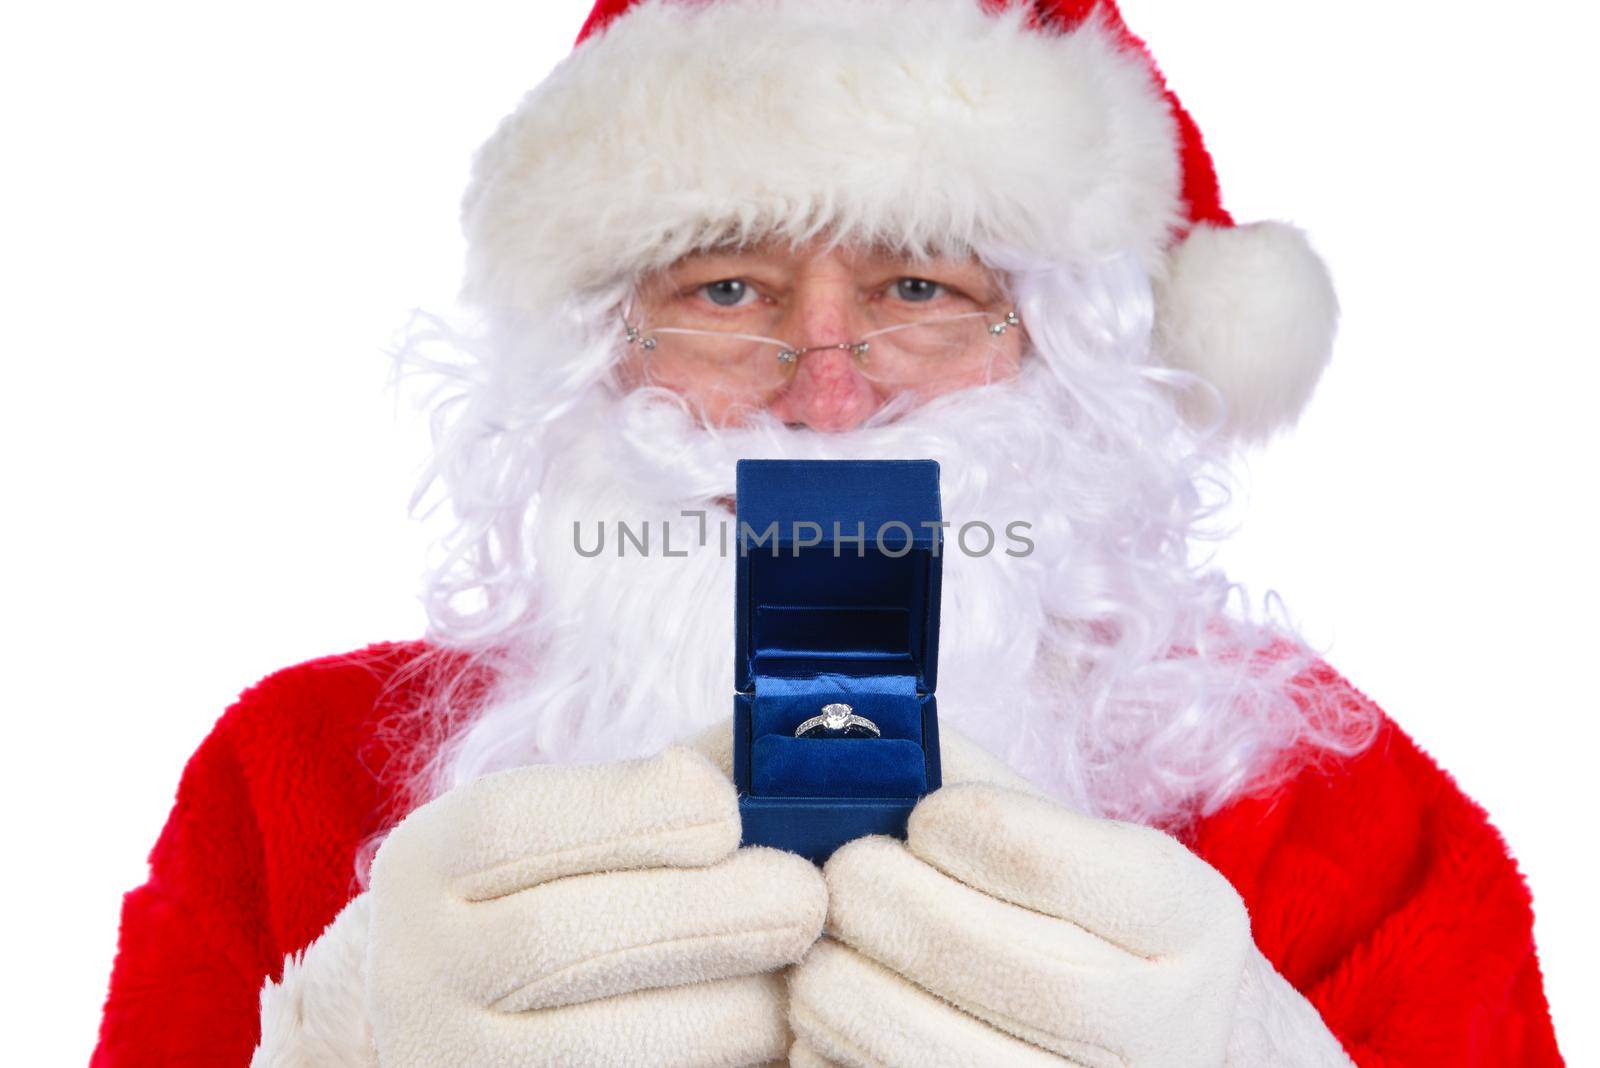 Santa Claus holding an diamond engagement ring in a blue box closeup in front of his face - focus is on ring by sCukrov